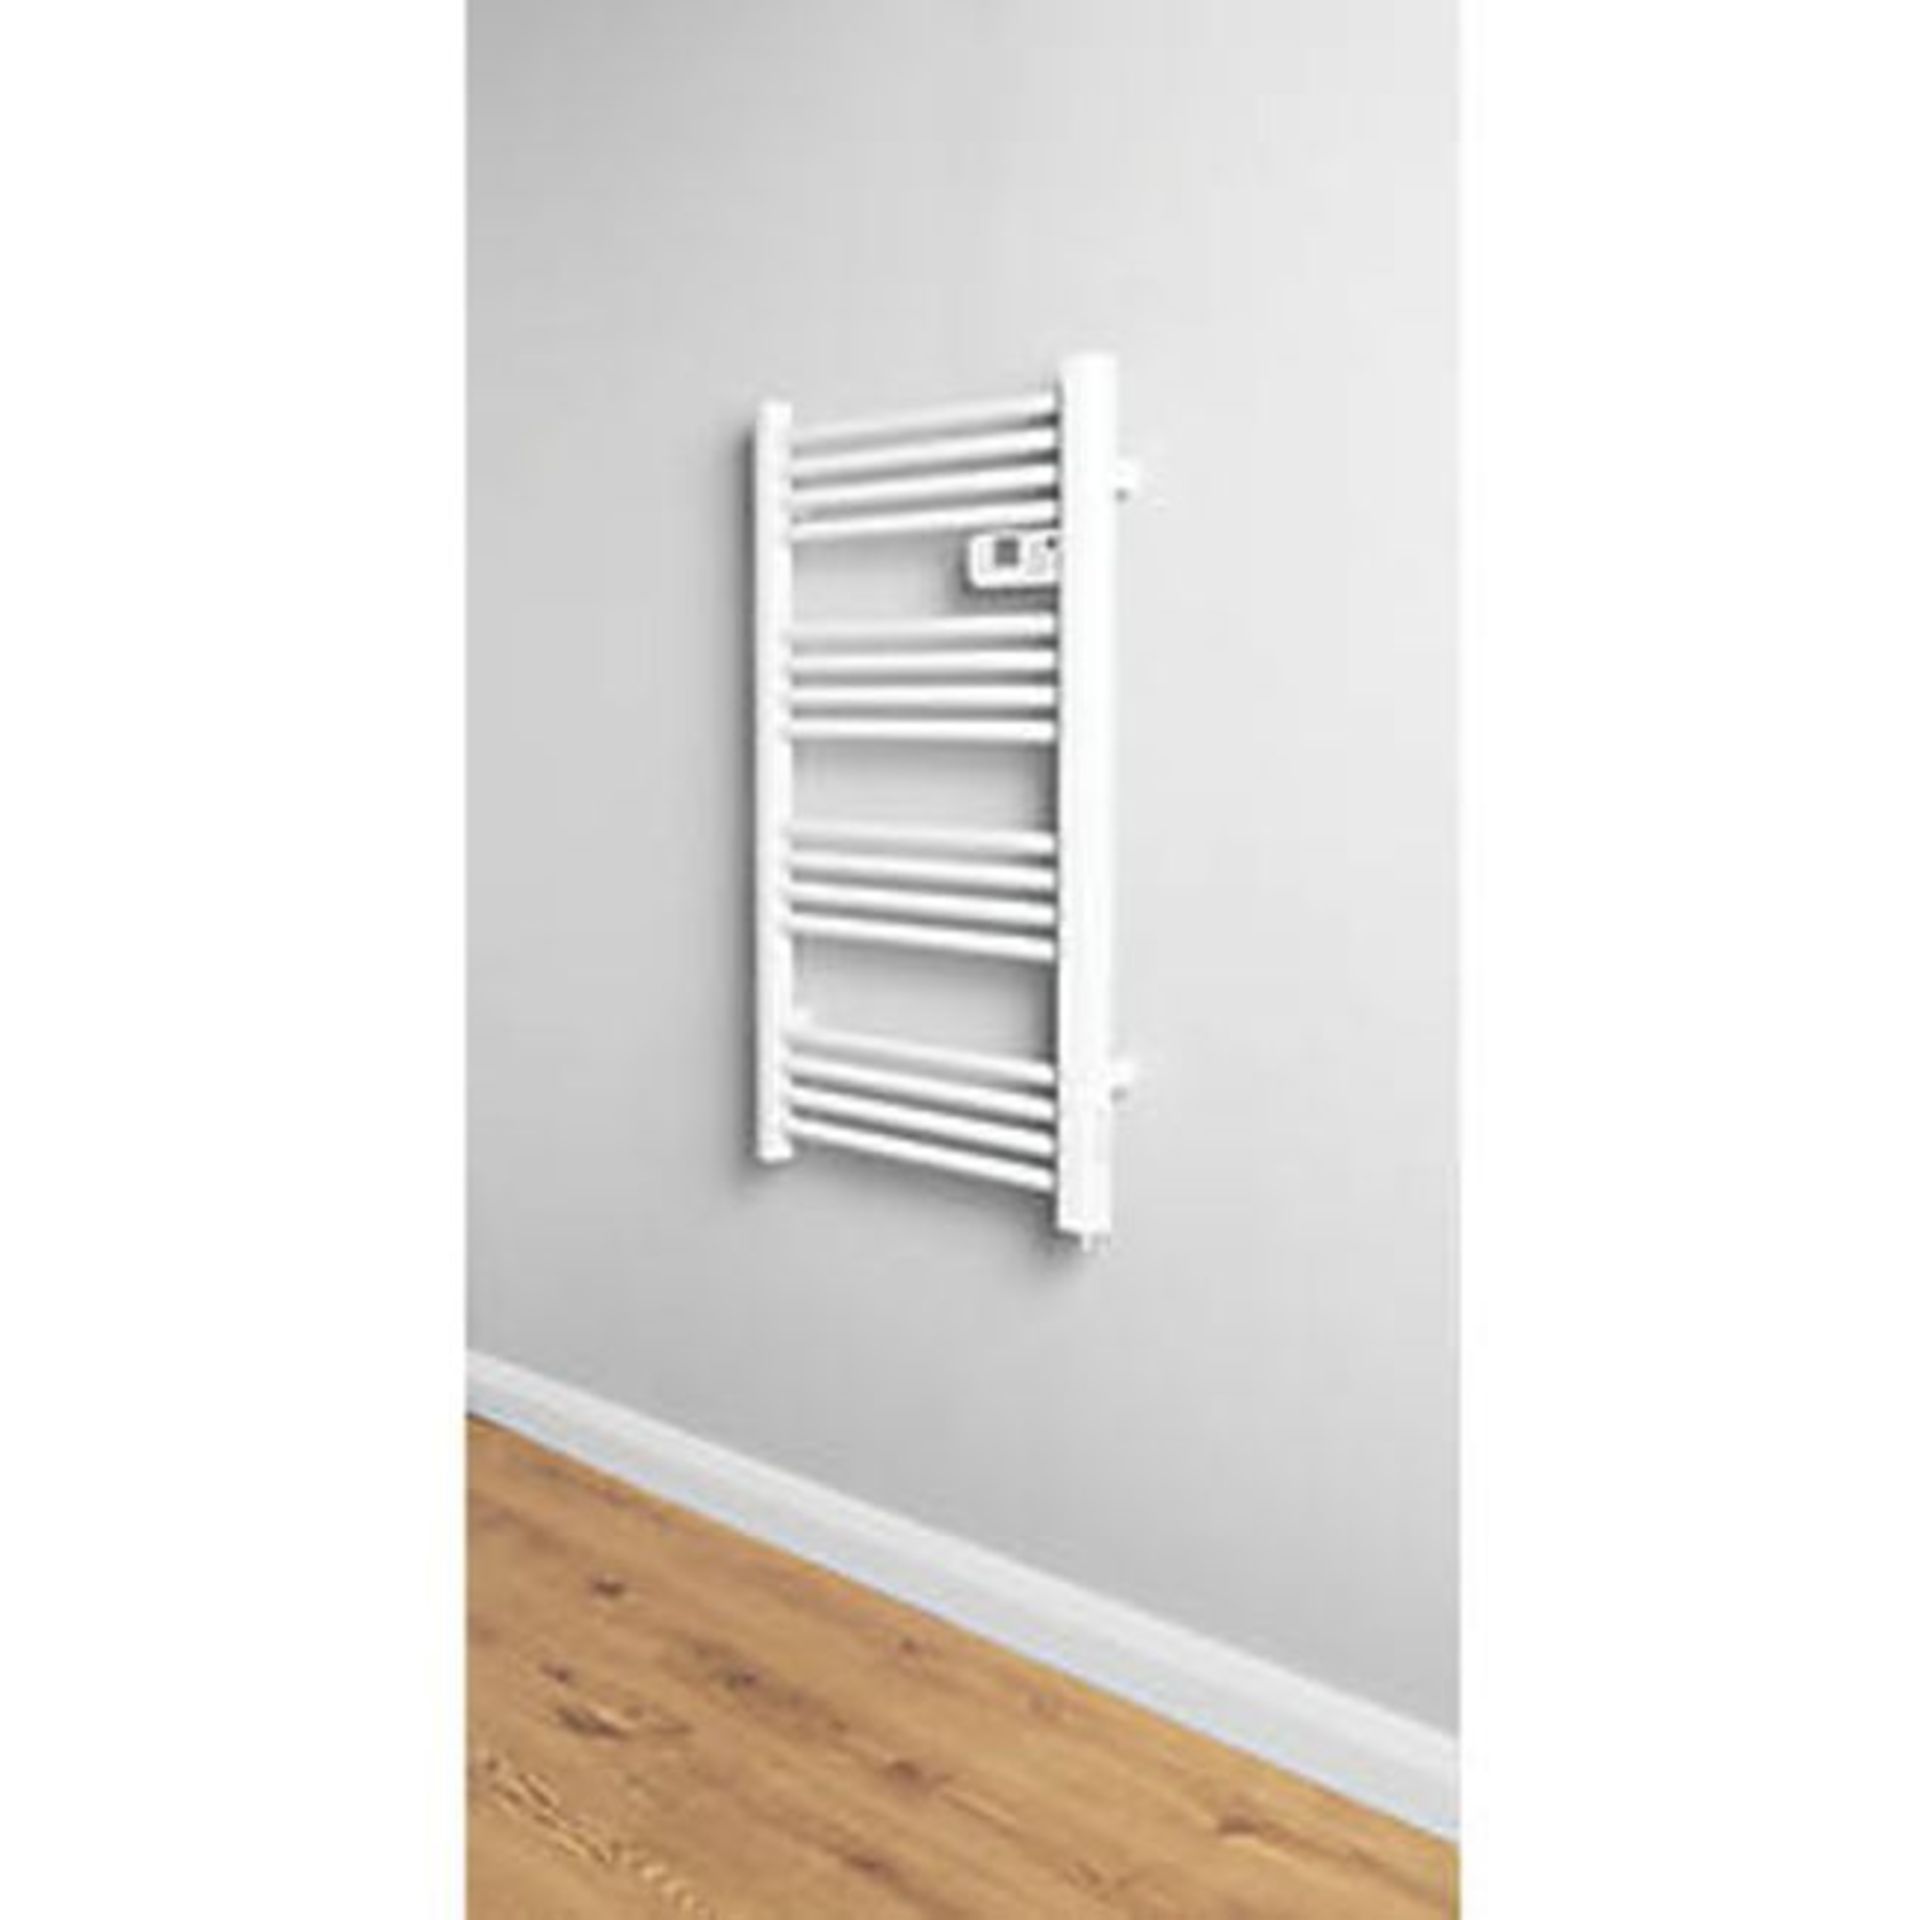 New Kandor 500W Electric White Towel Warmer (H)980mm (W)550mm. This Electrical 500W White Towel